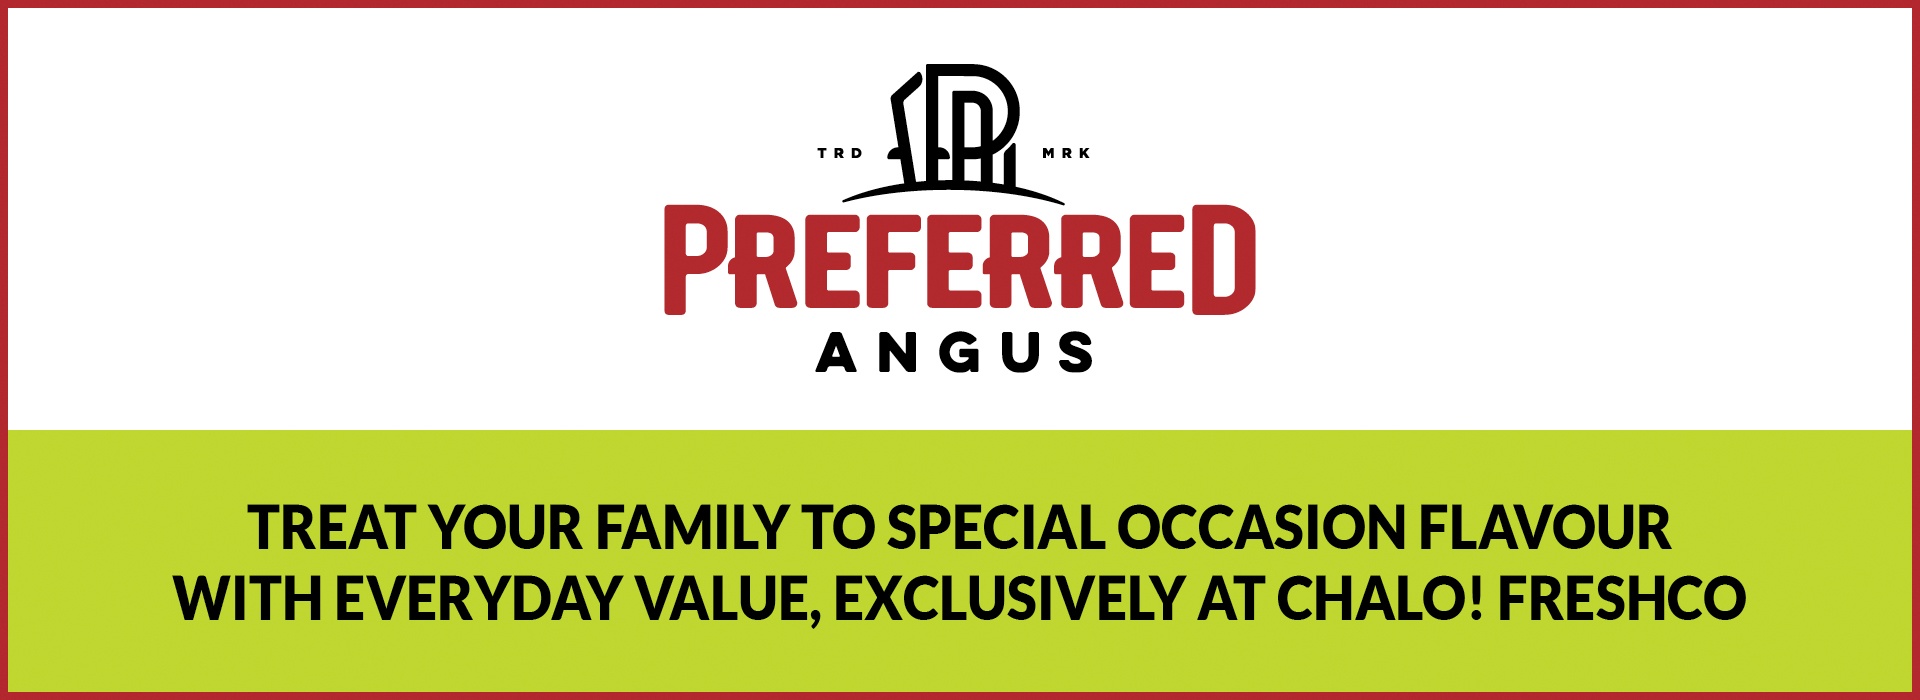 Text reading, “Treat your family to special occasion flavour with everyday value, exclusively at Chalo! Freshco”. Along with a logo of Preferred Angus in the top centre.